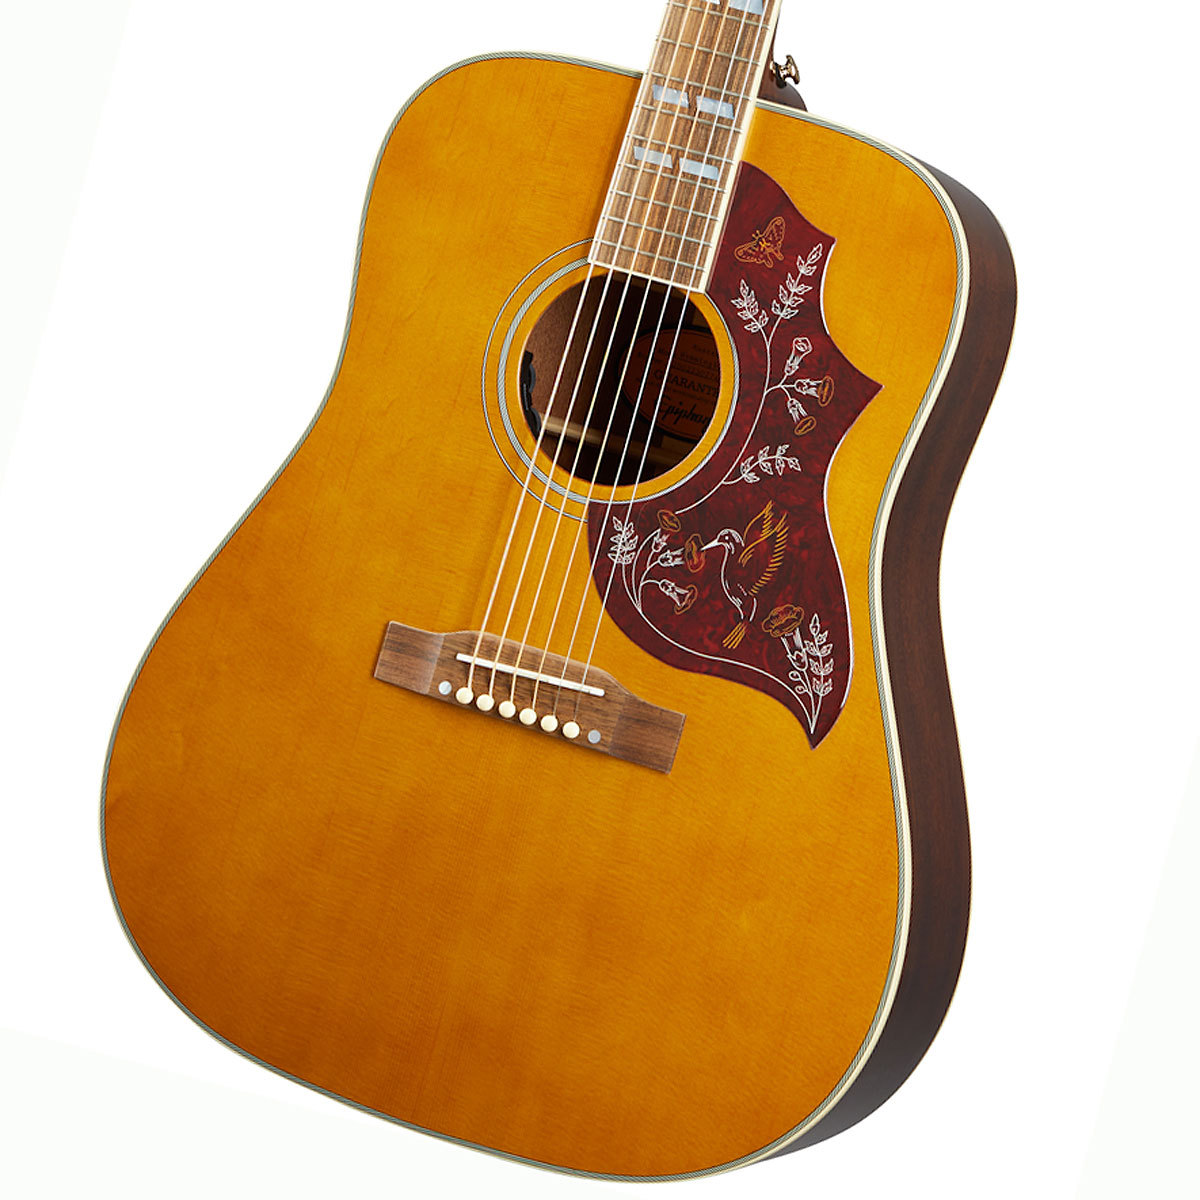 Epiphone / Inspired by Gibson Masterbilt Hummingbird Aged Antique